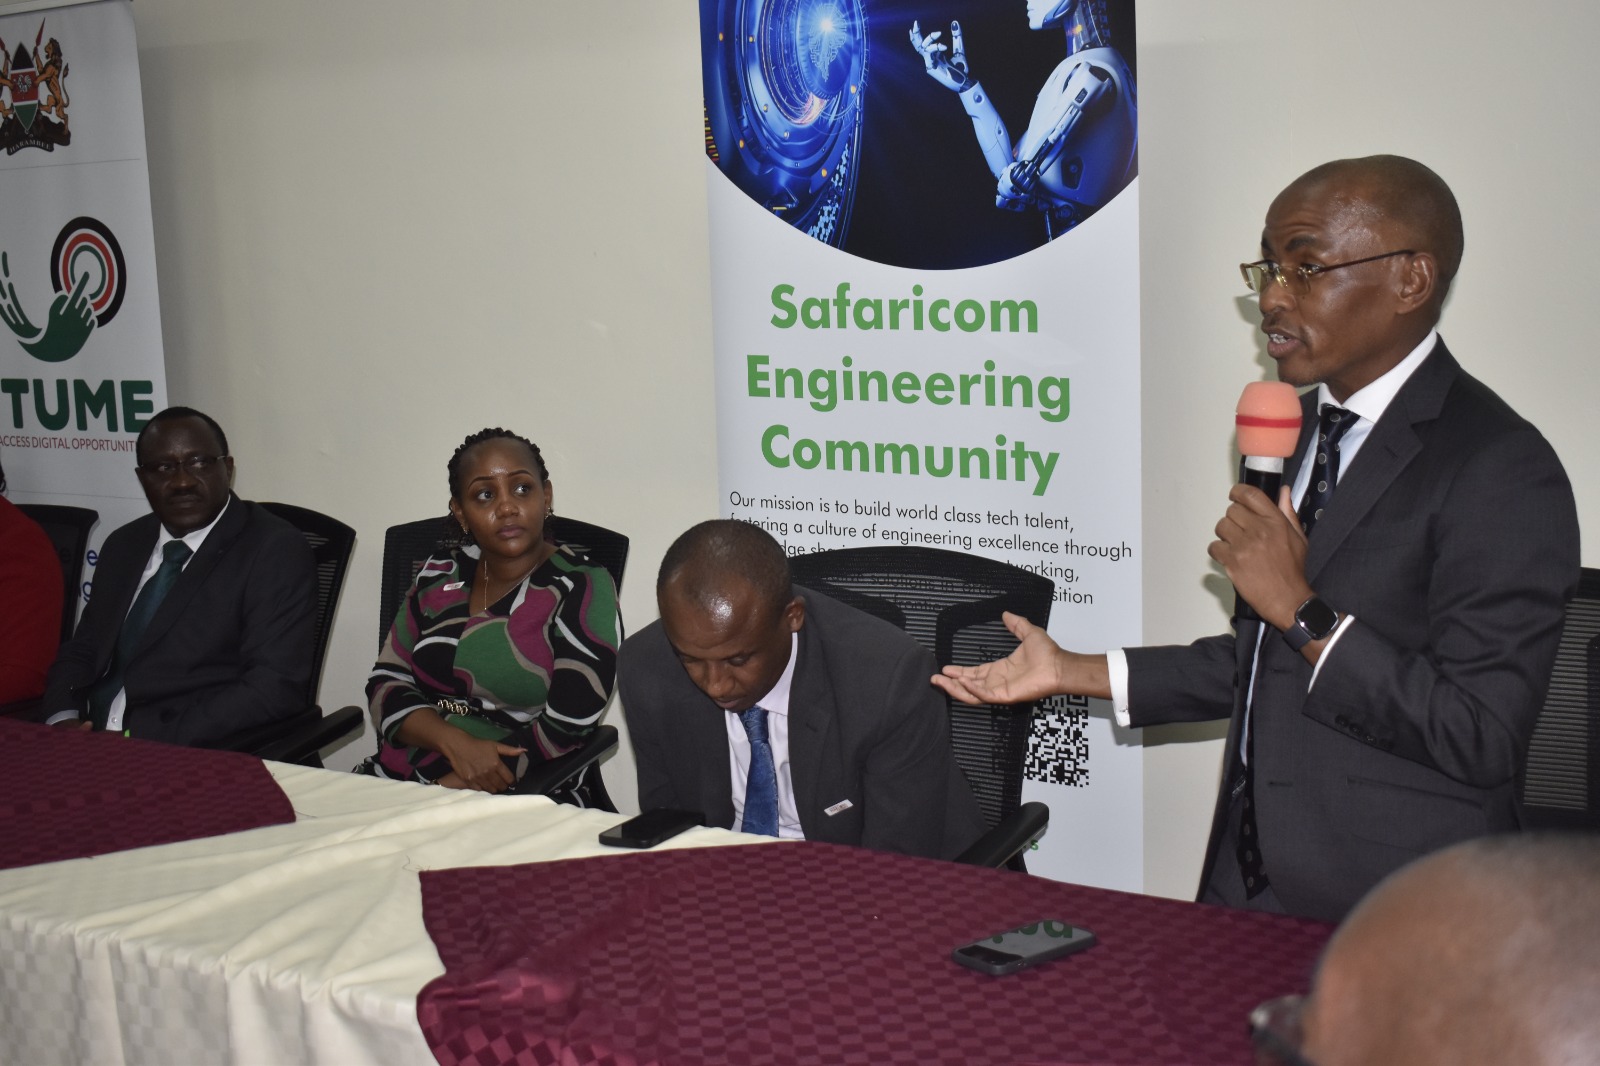 Safaricom Engineering Community in partnership with Makueni County Government and Wote Technical Training Institute workshop